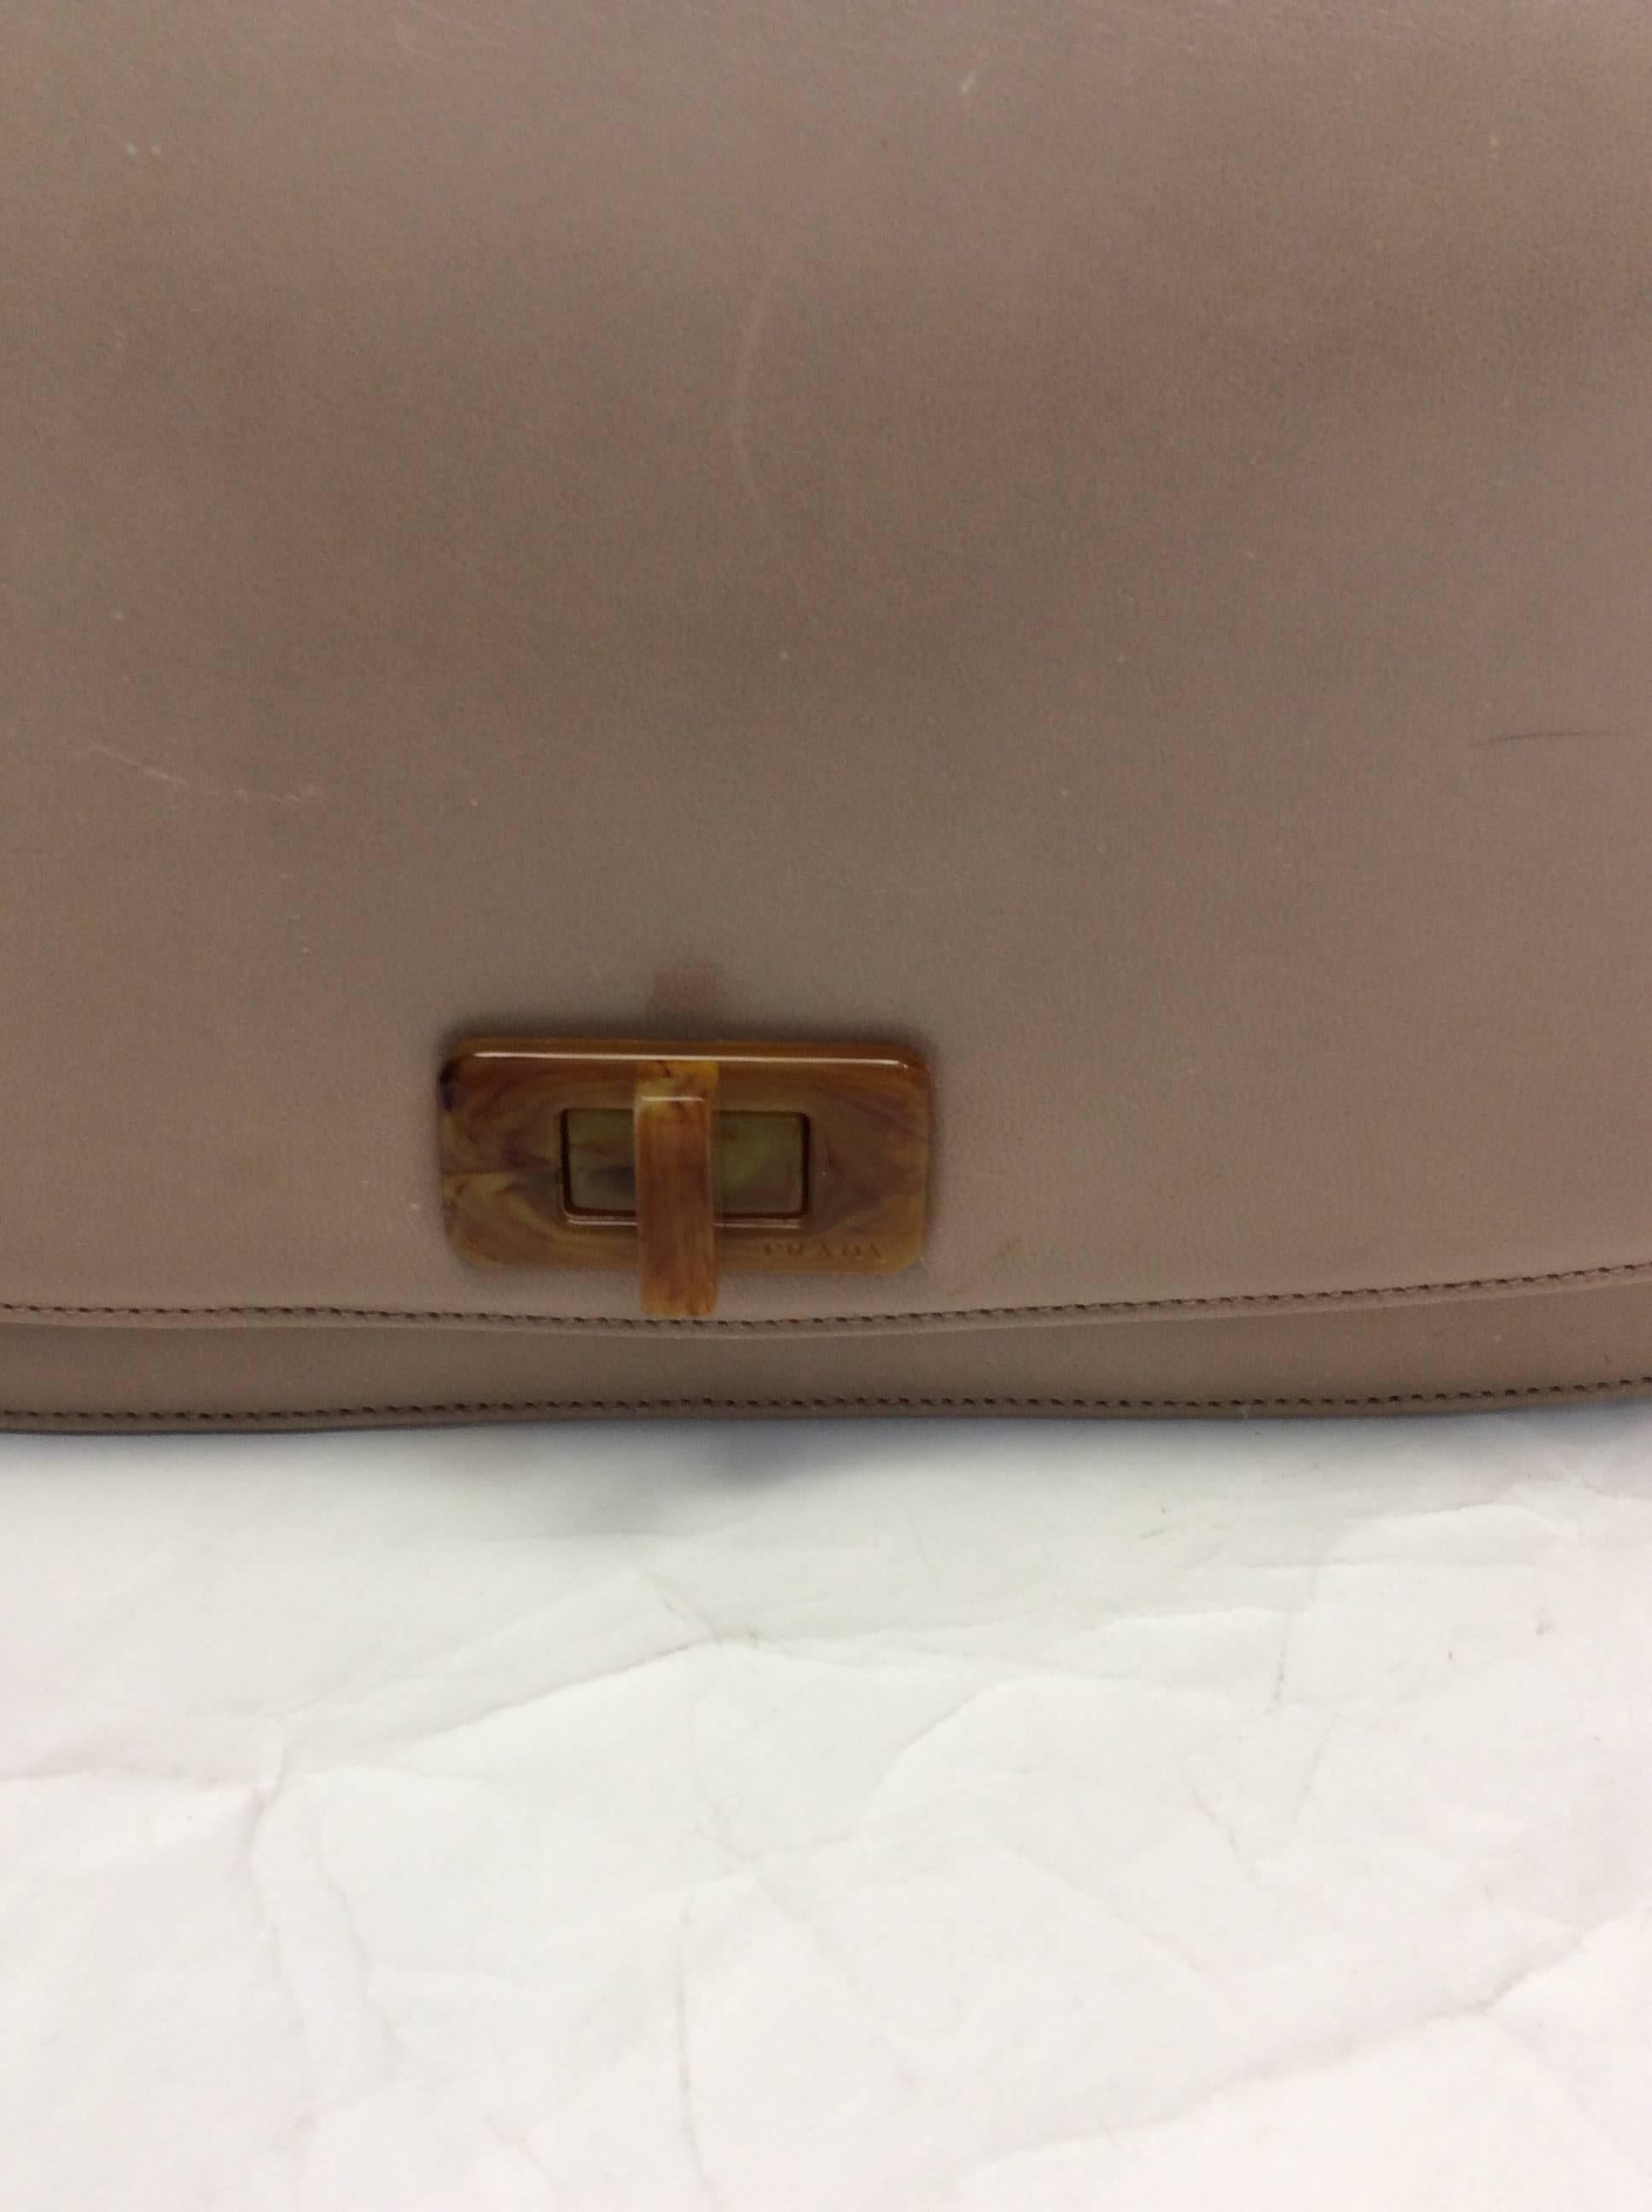 Prada Nude Horn Chain Clutch
Nude bag
Horn chain and toggle closure
$250
*scratches on leather are noted in photo